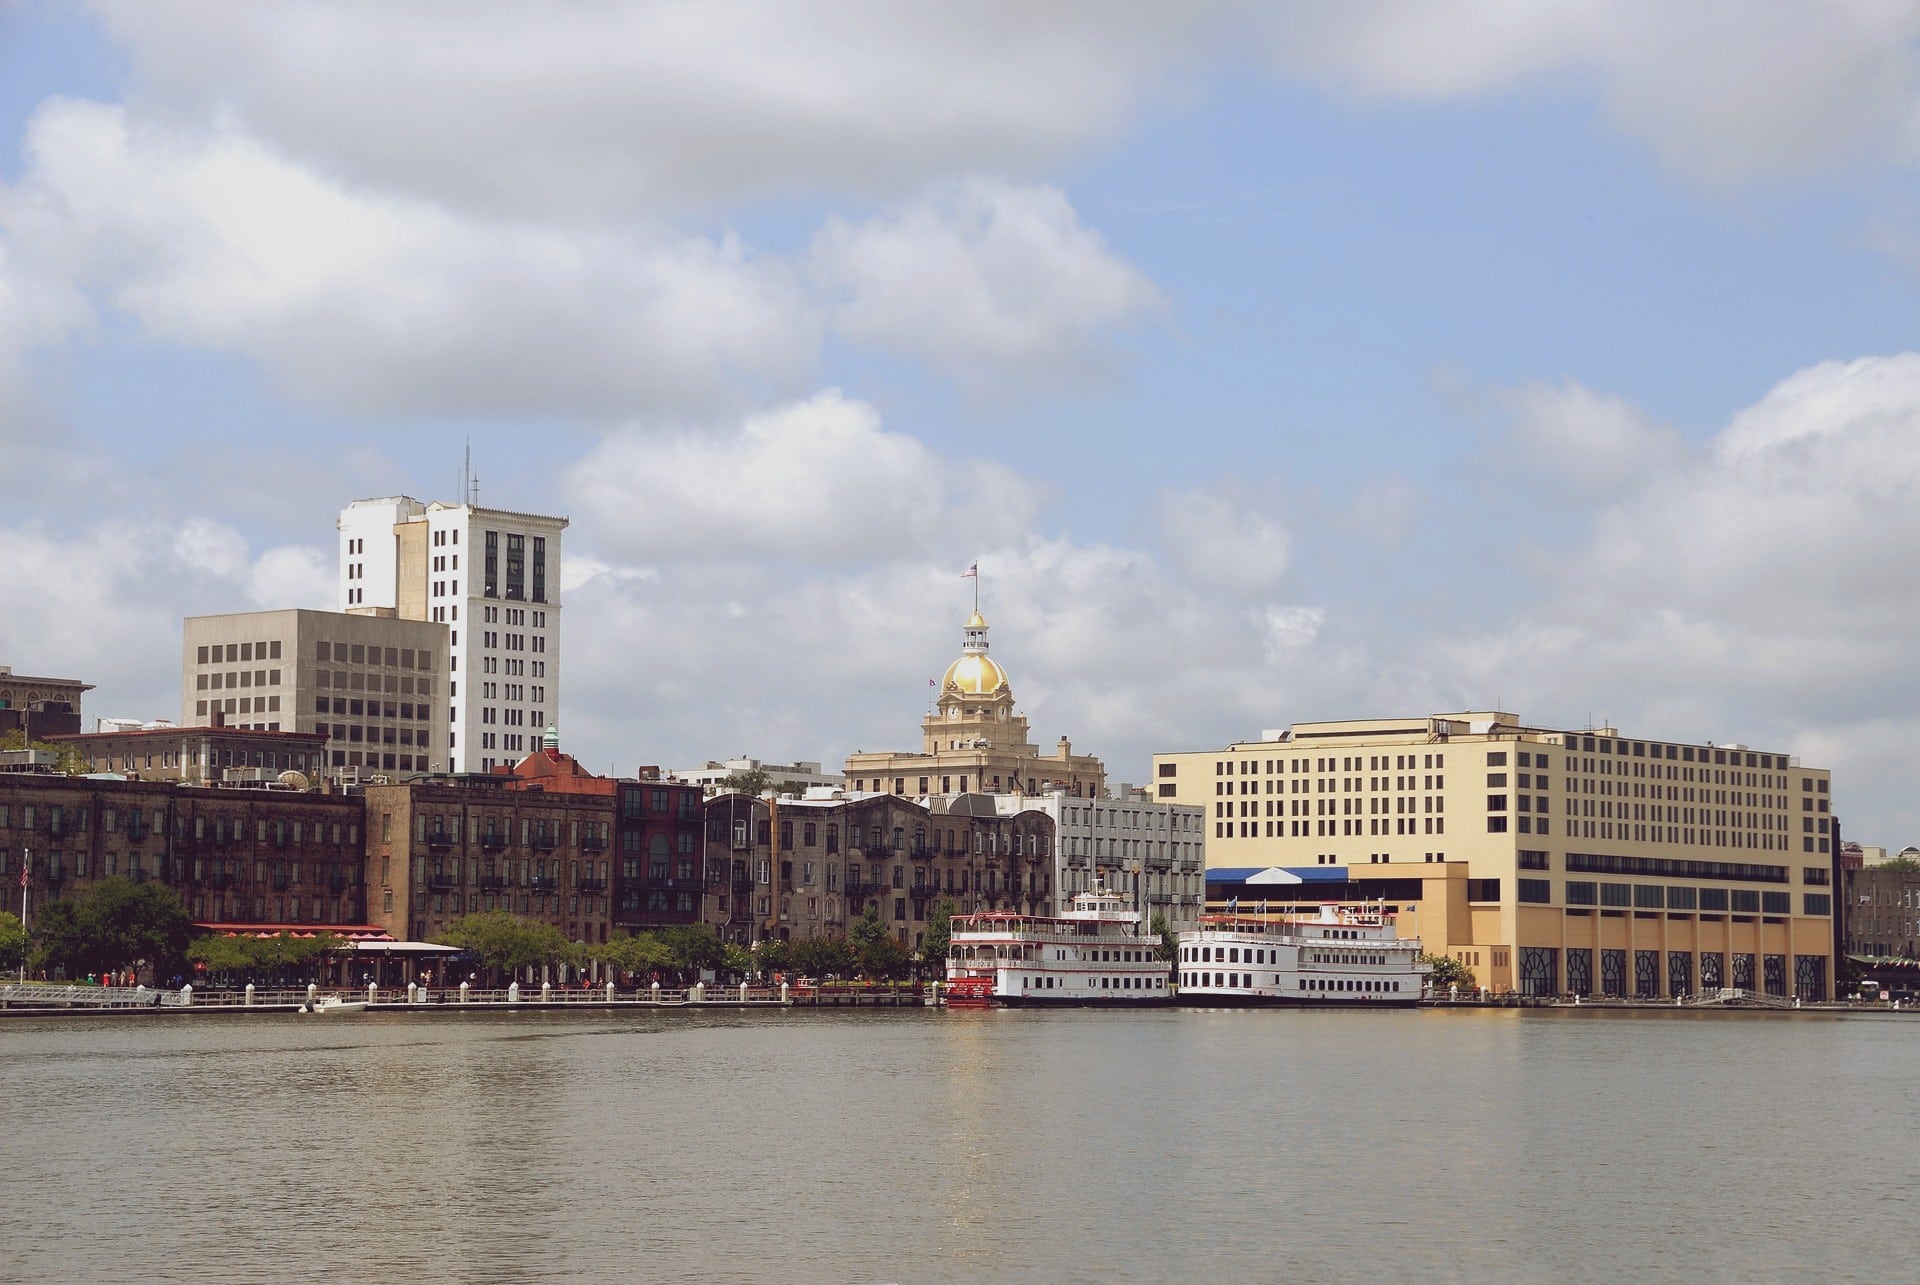 The Best Areas to Stay in Savannah, GA